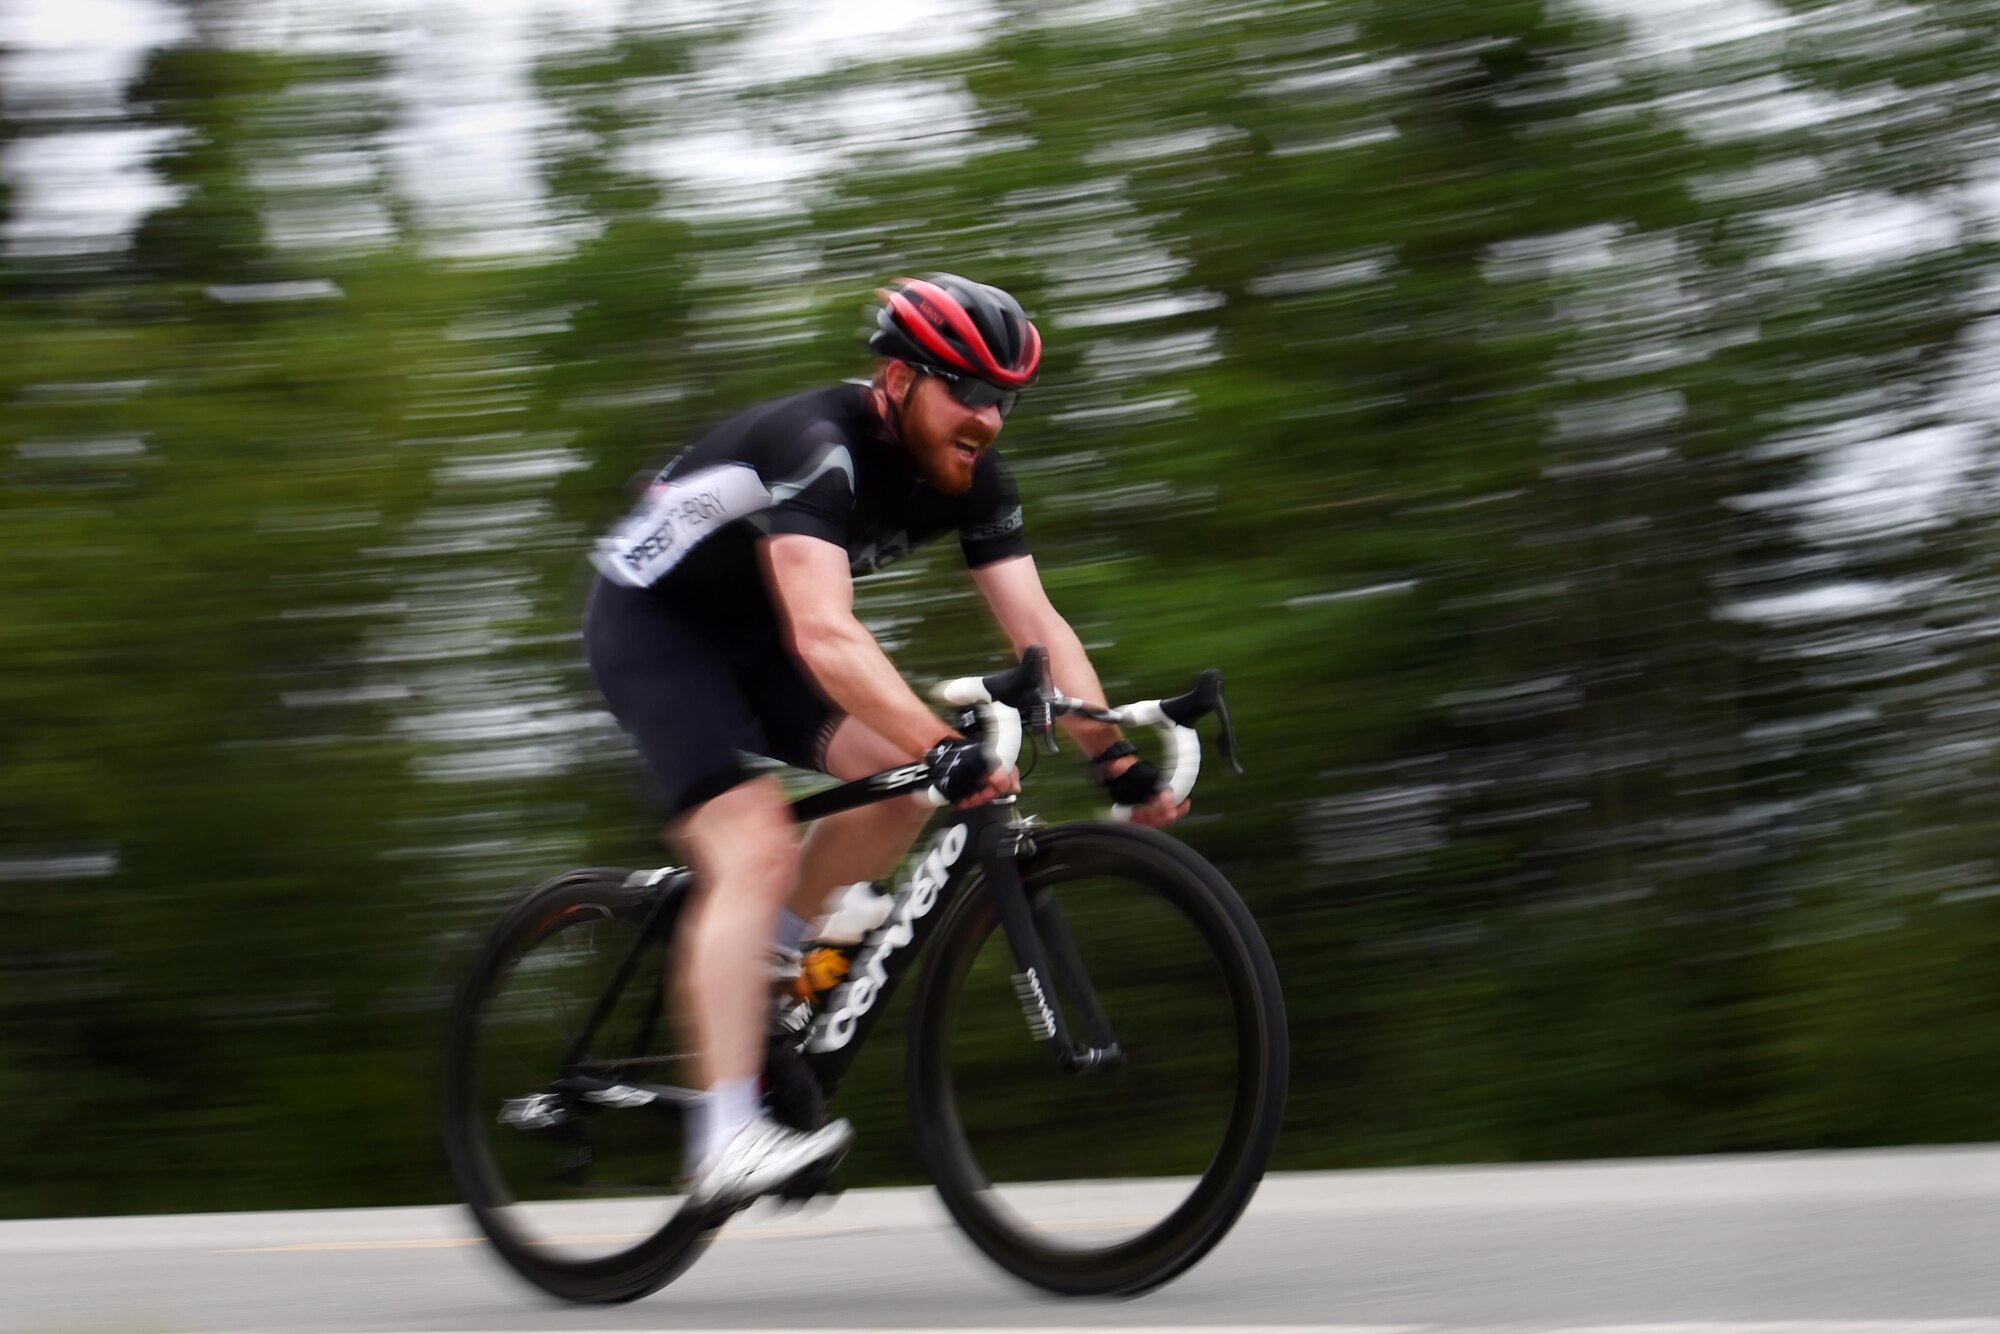 A cyclist streaks down the race path during the Moose Run time-trial race at Joint Base Elmendorf-Richardson, Alaska, Aug. 3, 2017. For more than 15 years, the club has hosted road race events at JBER.